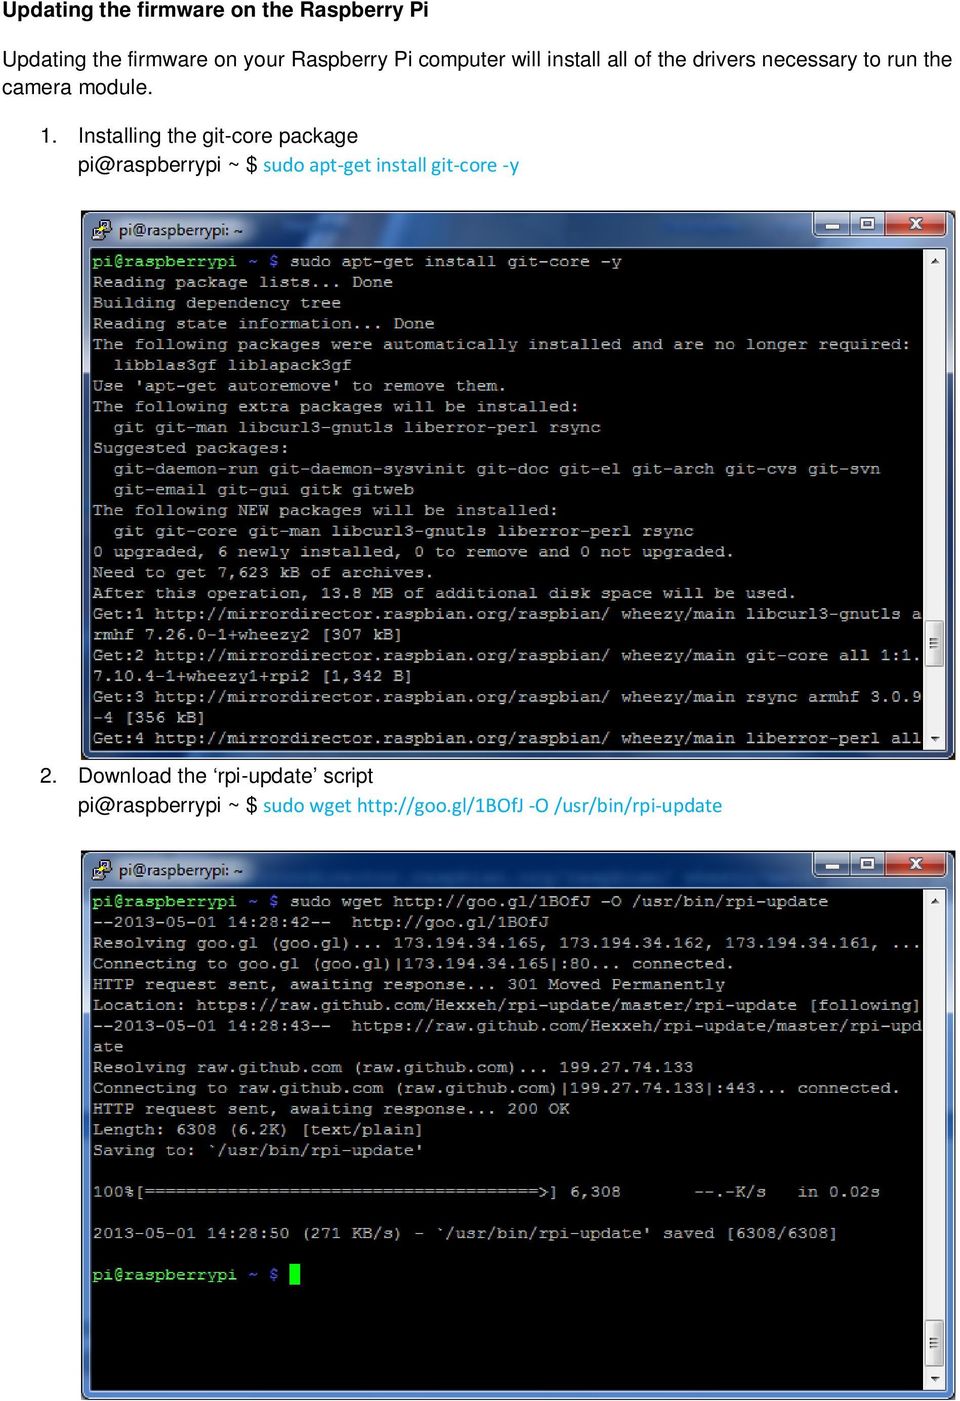 Installing the git-core package pi@raspberrypi ~ $ sudo apt-get install git-core -y 2.